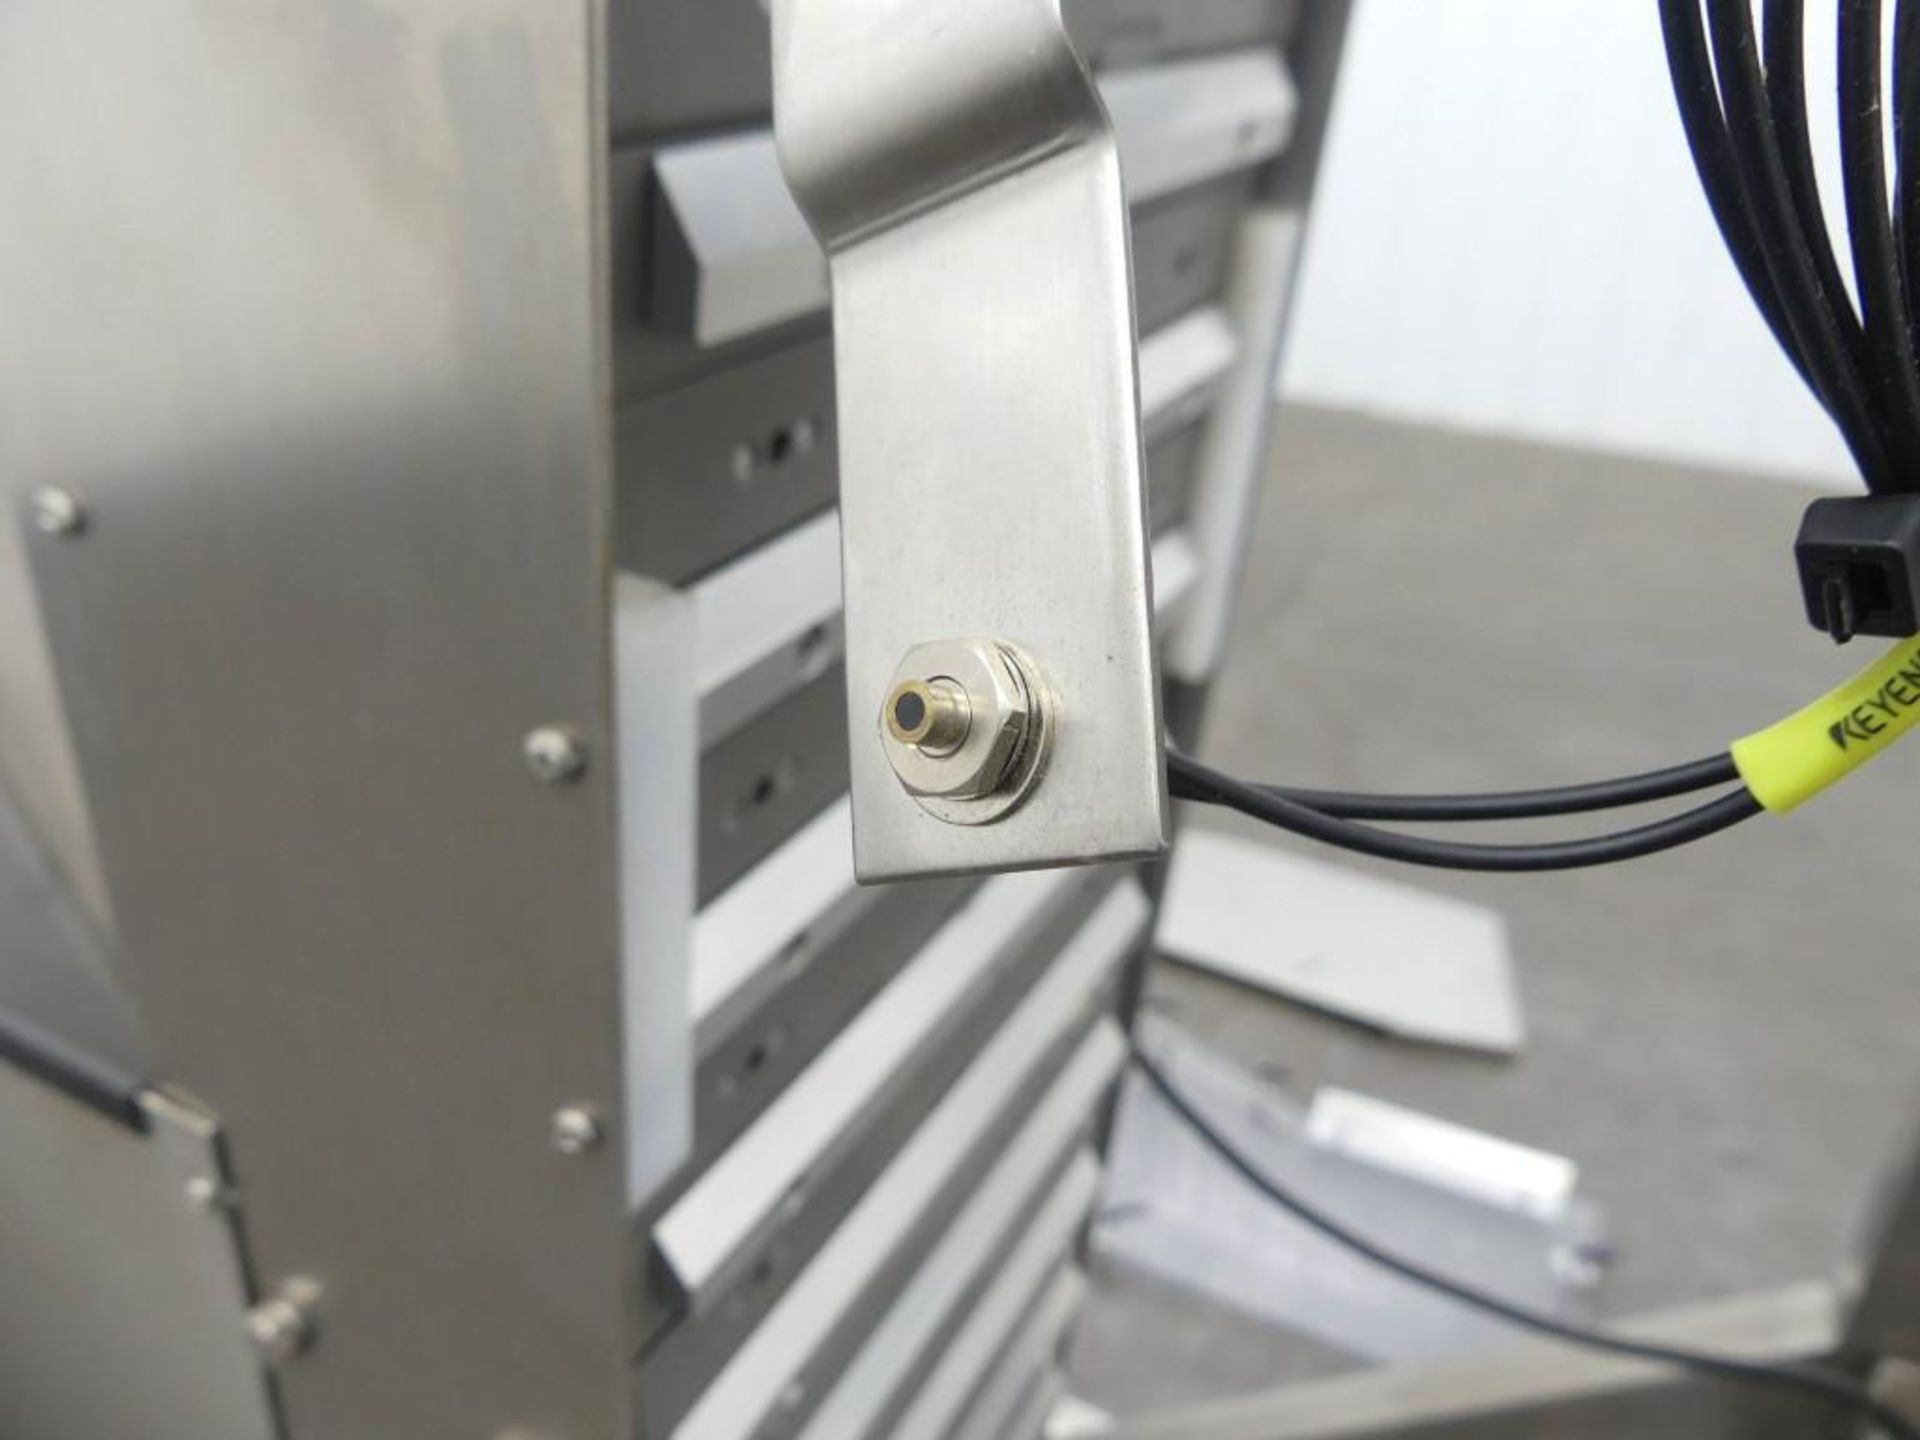 2019 AccuTek Packaging Equipment Co. 50-C0E-CH2 Stainless Steel Cap Loader Elevator - Image 14 of 25